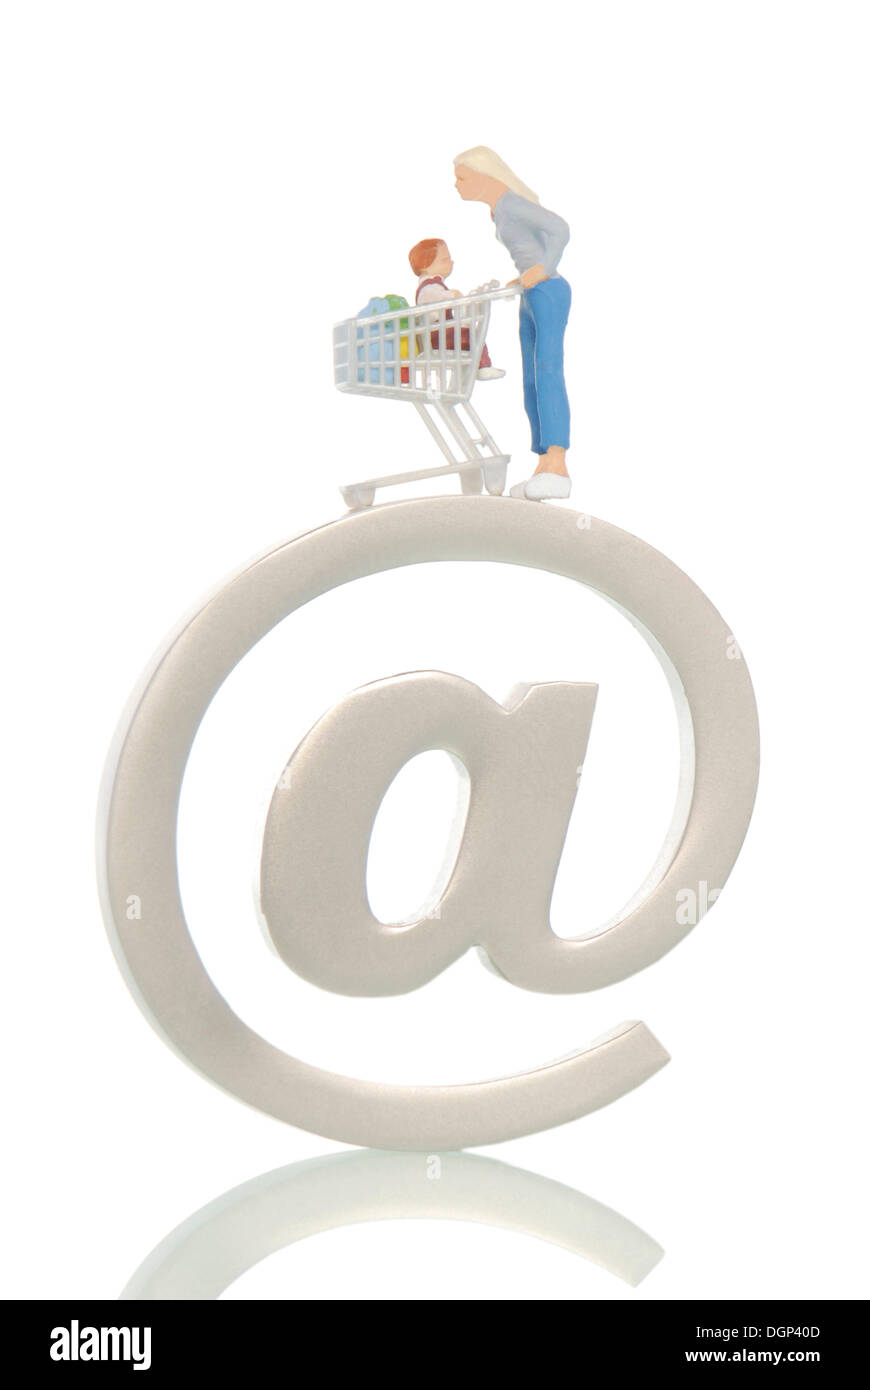 Miniature figures of a woman with a shopping cart and an infant on an at sign, symbolic image for online shopping Stock Photo